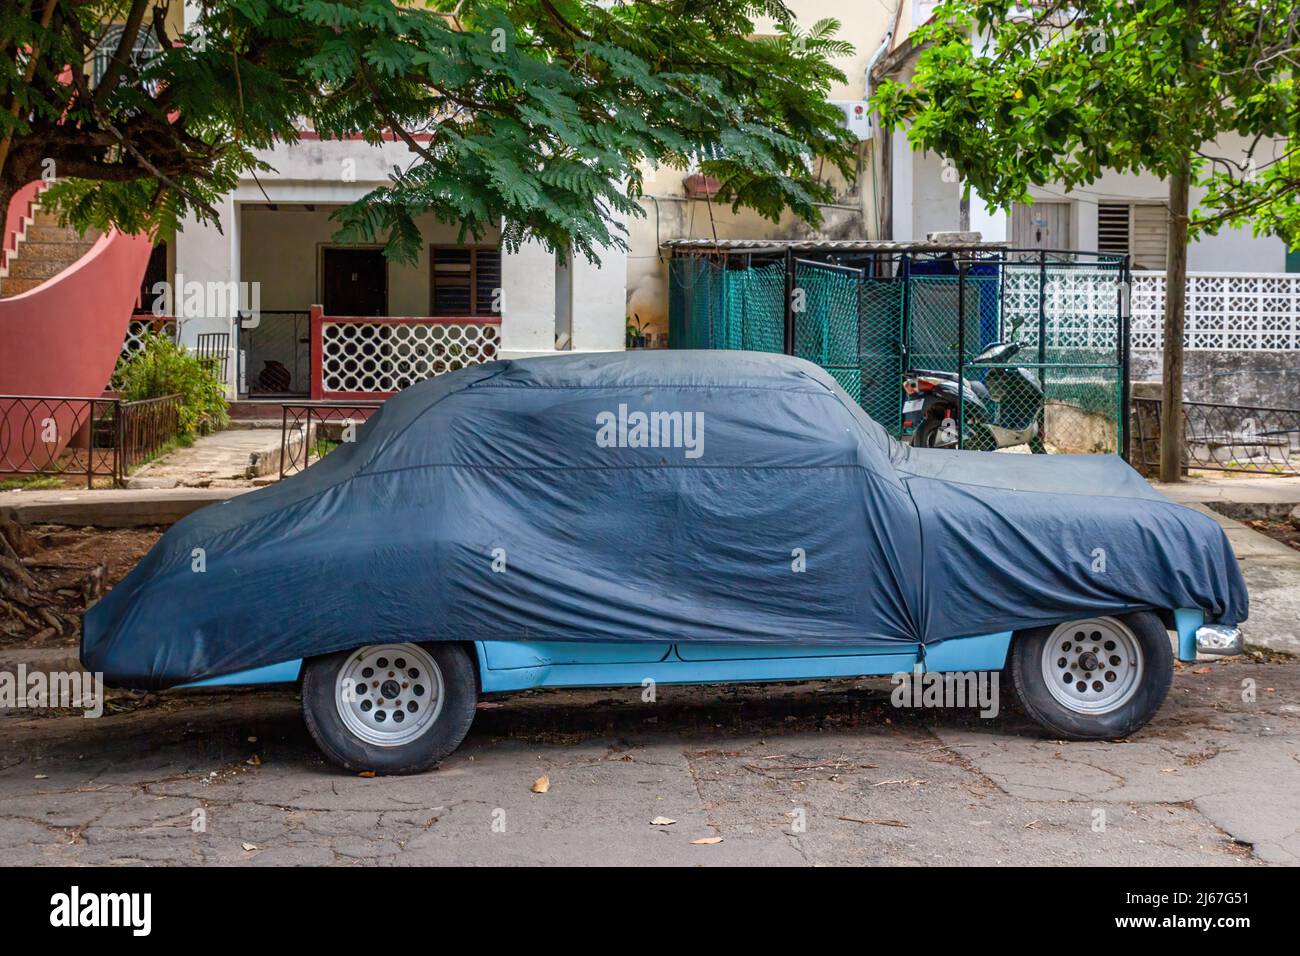 An old vintage American car is covered with a tarp while parking under a tree. Private houses and an electric bicycle are seen in the background. Stock Photo